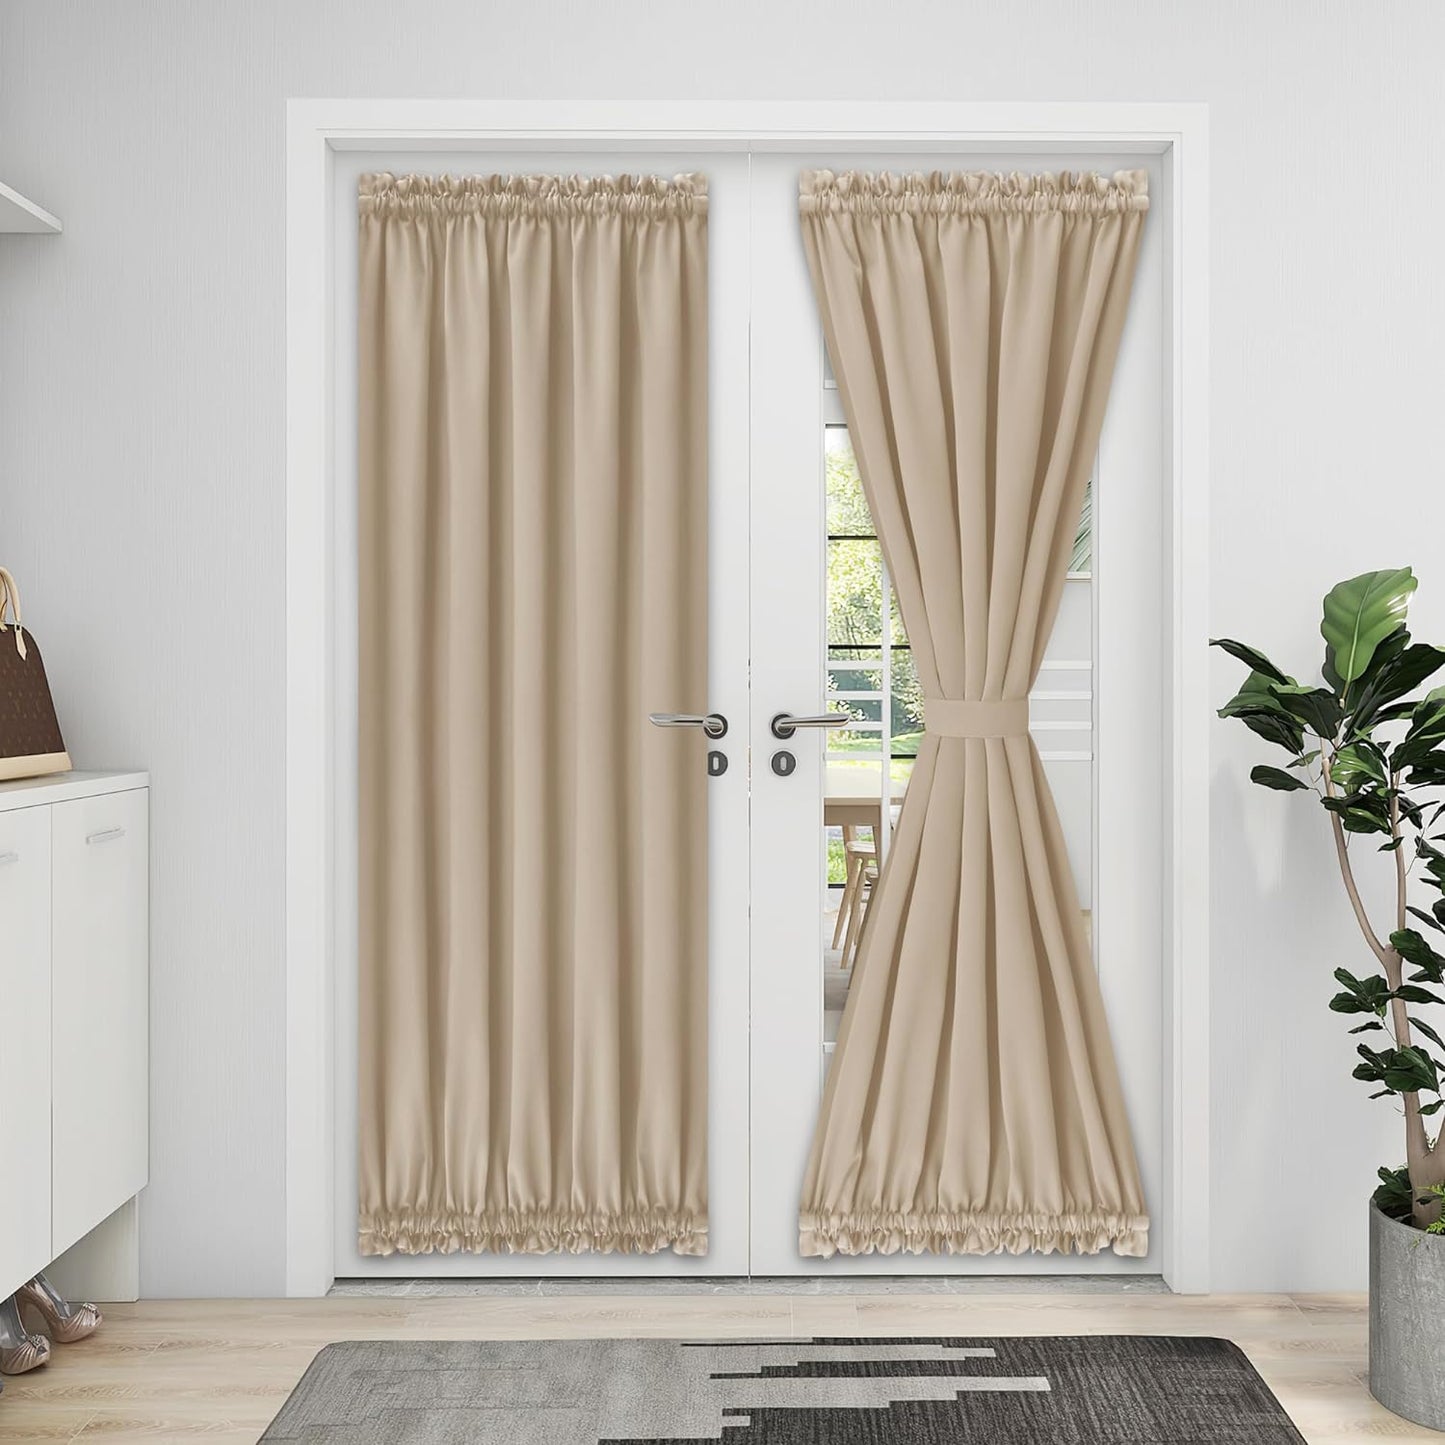 Easy-Going Blackout Door Curtains, Rod Pocket Privacy Light Filtering Sidelight Curtains French Door Curtains with Tieback, 1 Panel, 25X40 Inch, Gray  Easy-Going Beige W52 X L72 Inch 